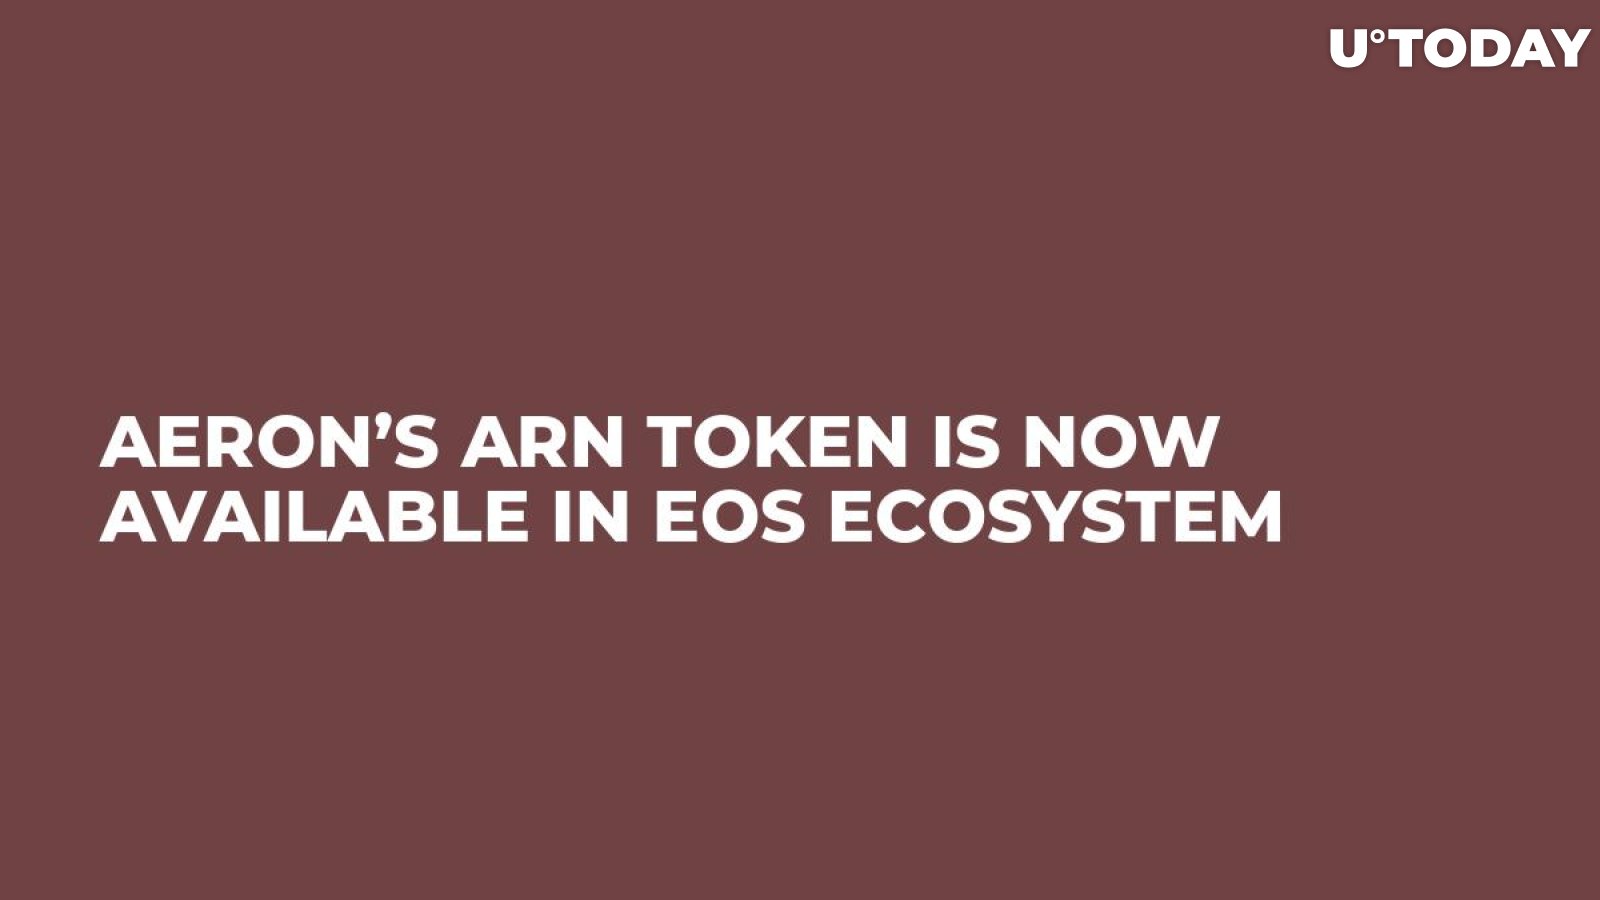 Aeron’s ARN token is now available in EOS ecosystem